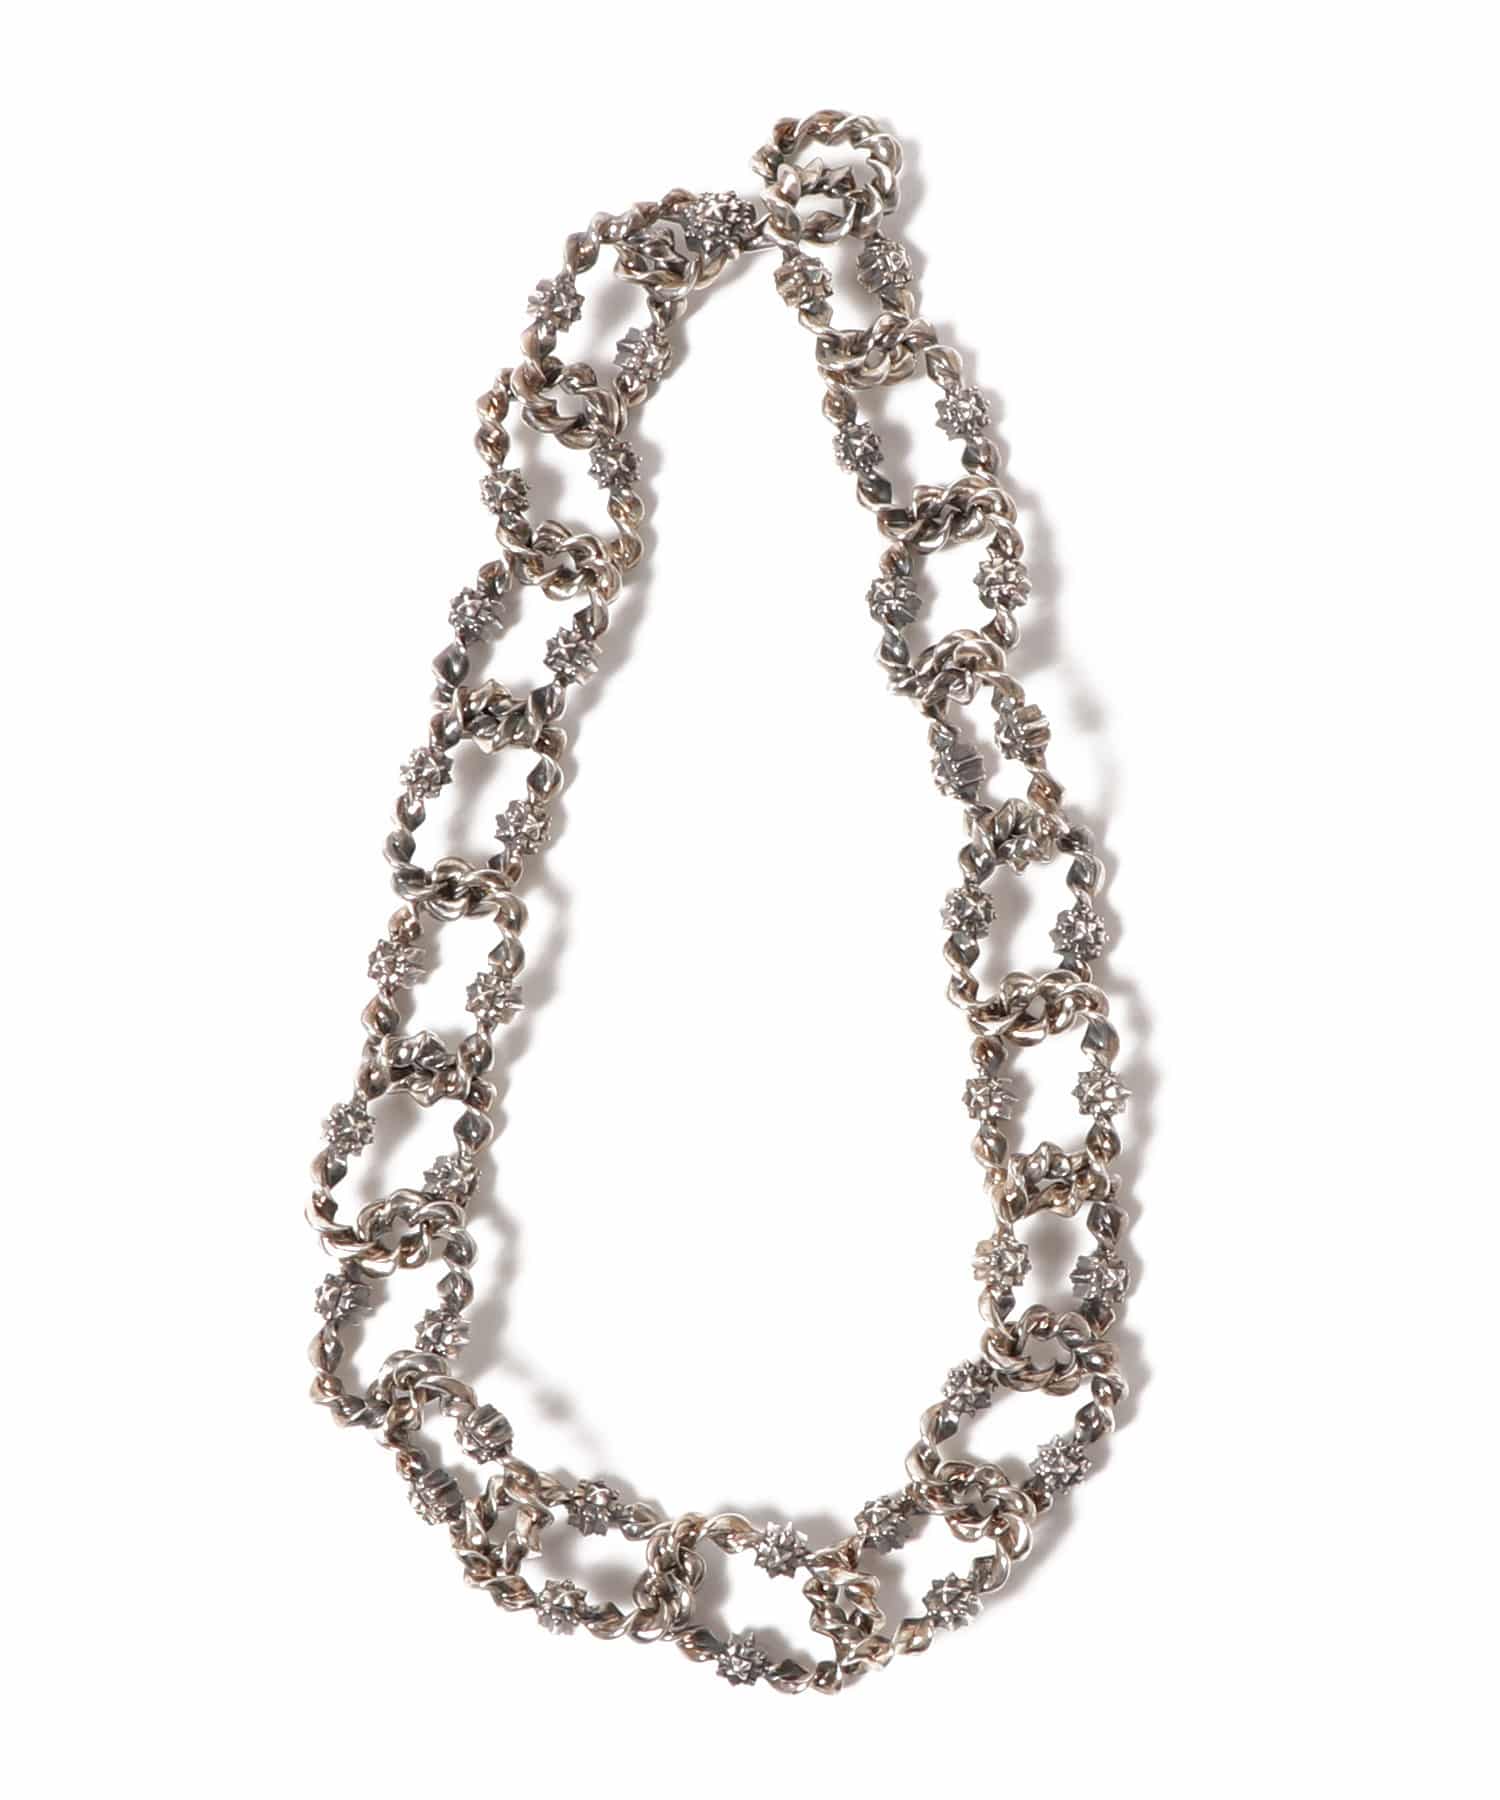 Twist angle Chain necklace